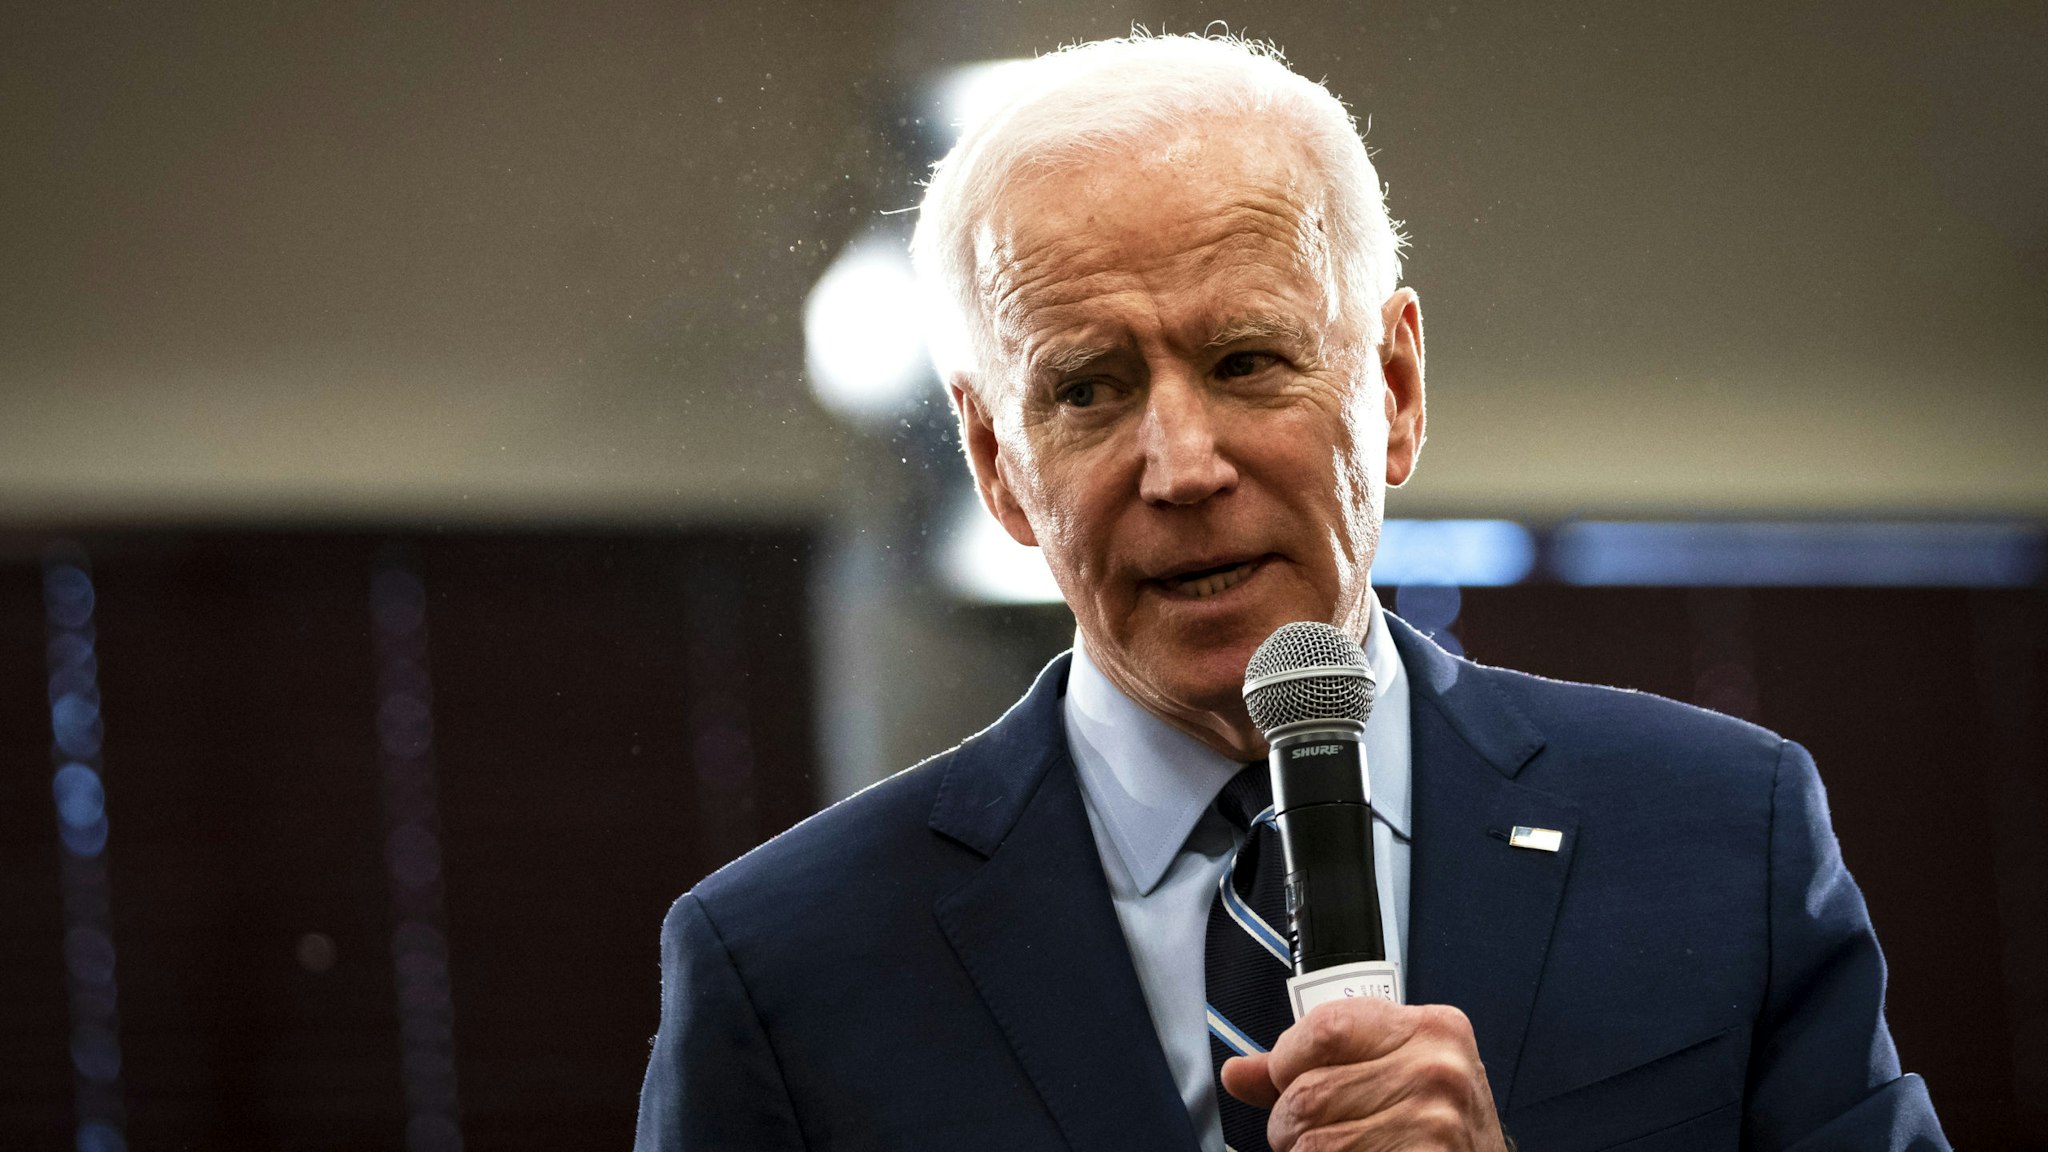 AMES, IA - JANUARY 21: Democratic presidential candidate former Vice President Joe Biden speaks during an event on January 21, 2020 in Ames, Iowa. With less than two weeks to go until the first-in-the-nation Iowa caucuses, candidates are making their final pitch to voters.